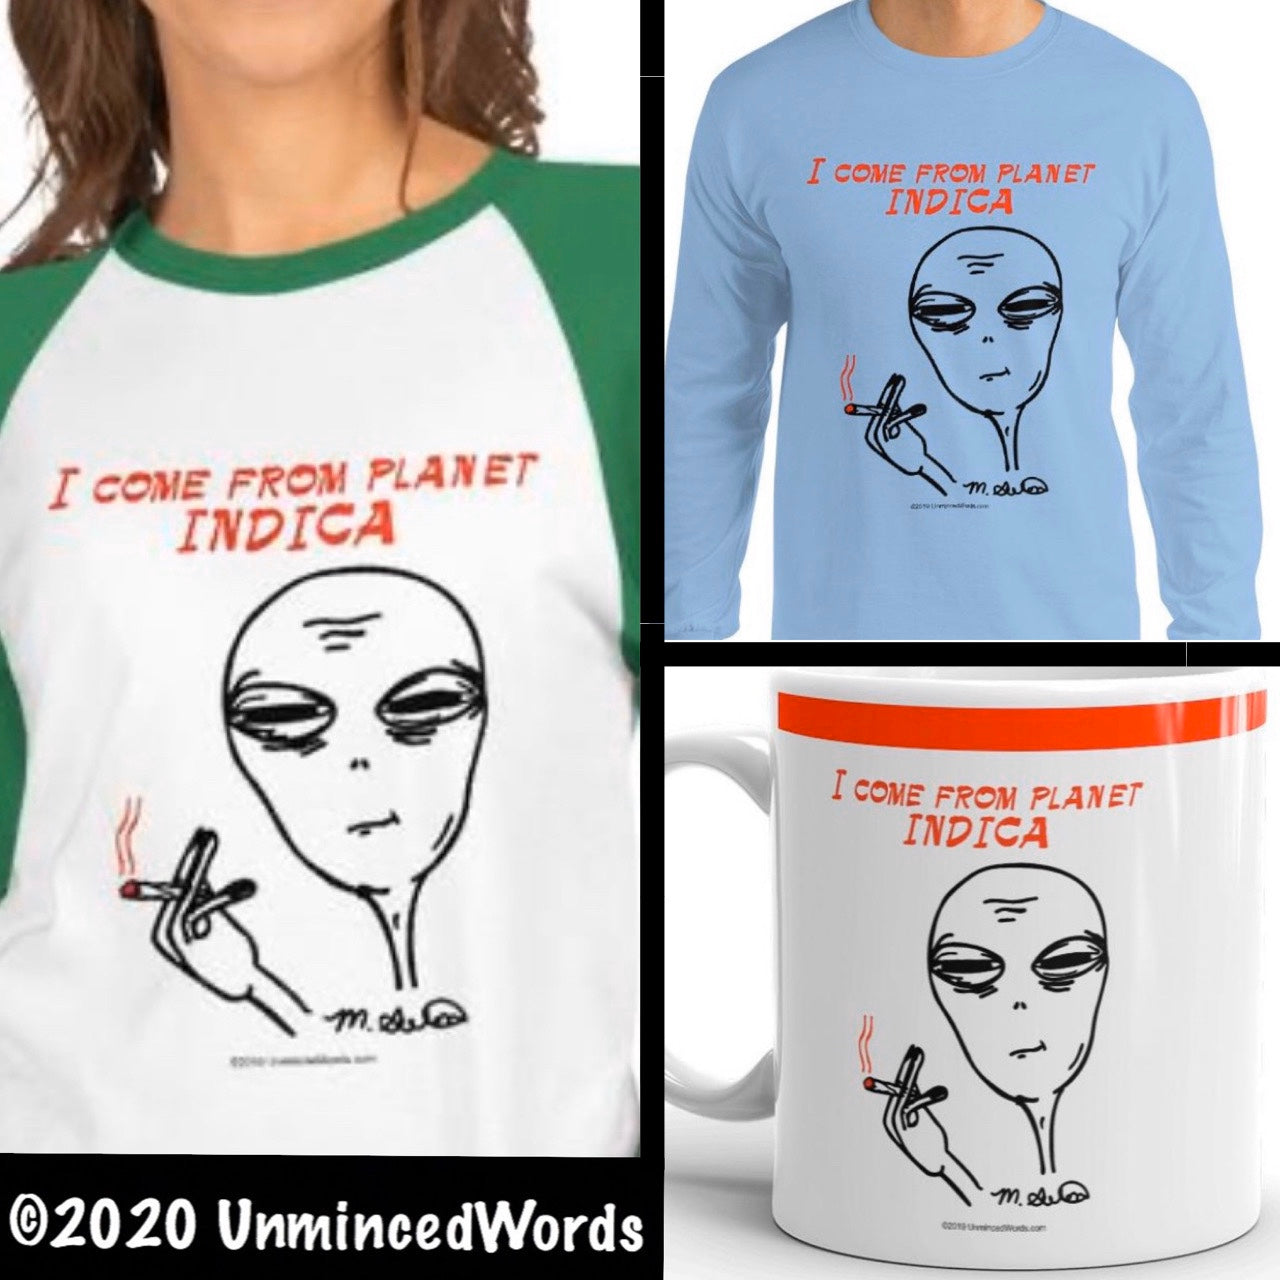 Alien holding a joint and saying “I come from Planet Indica” is the kind of fun we create at UnmincedWords.com